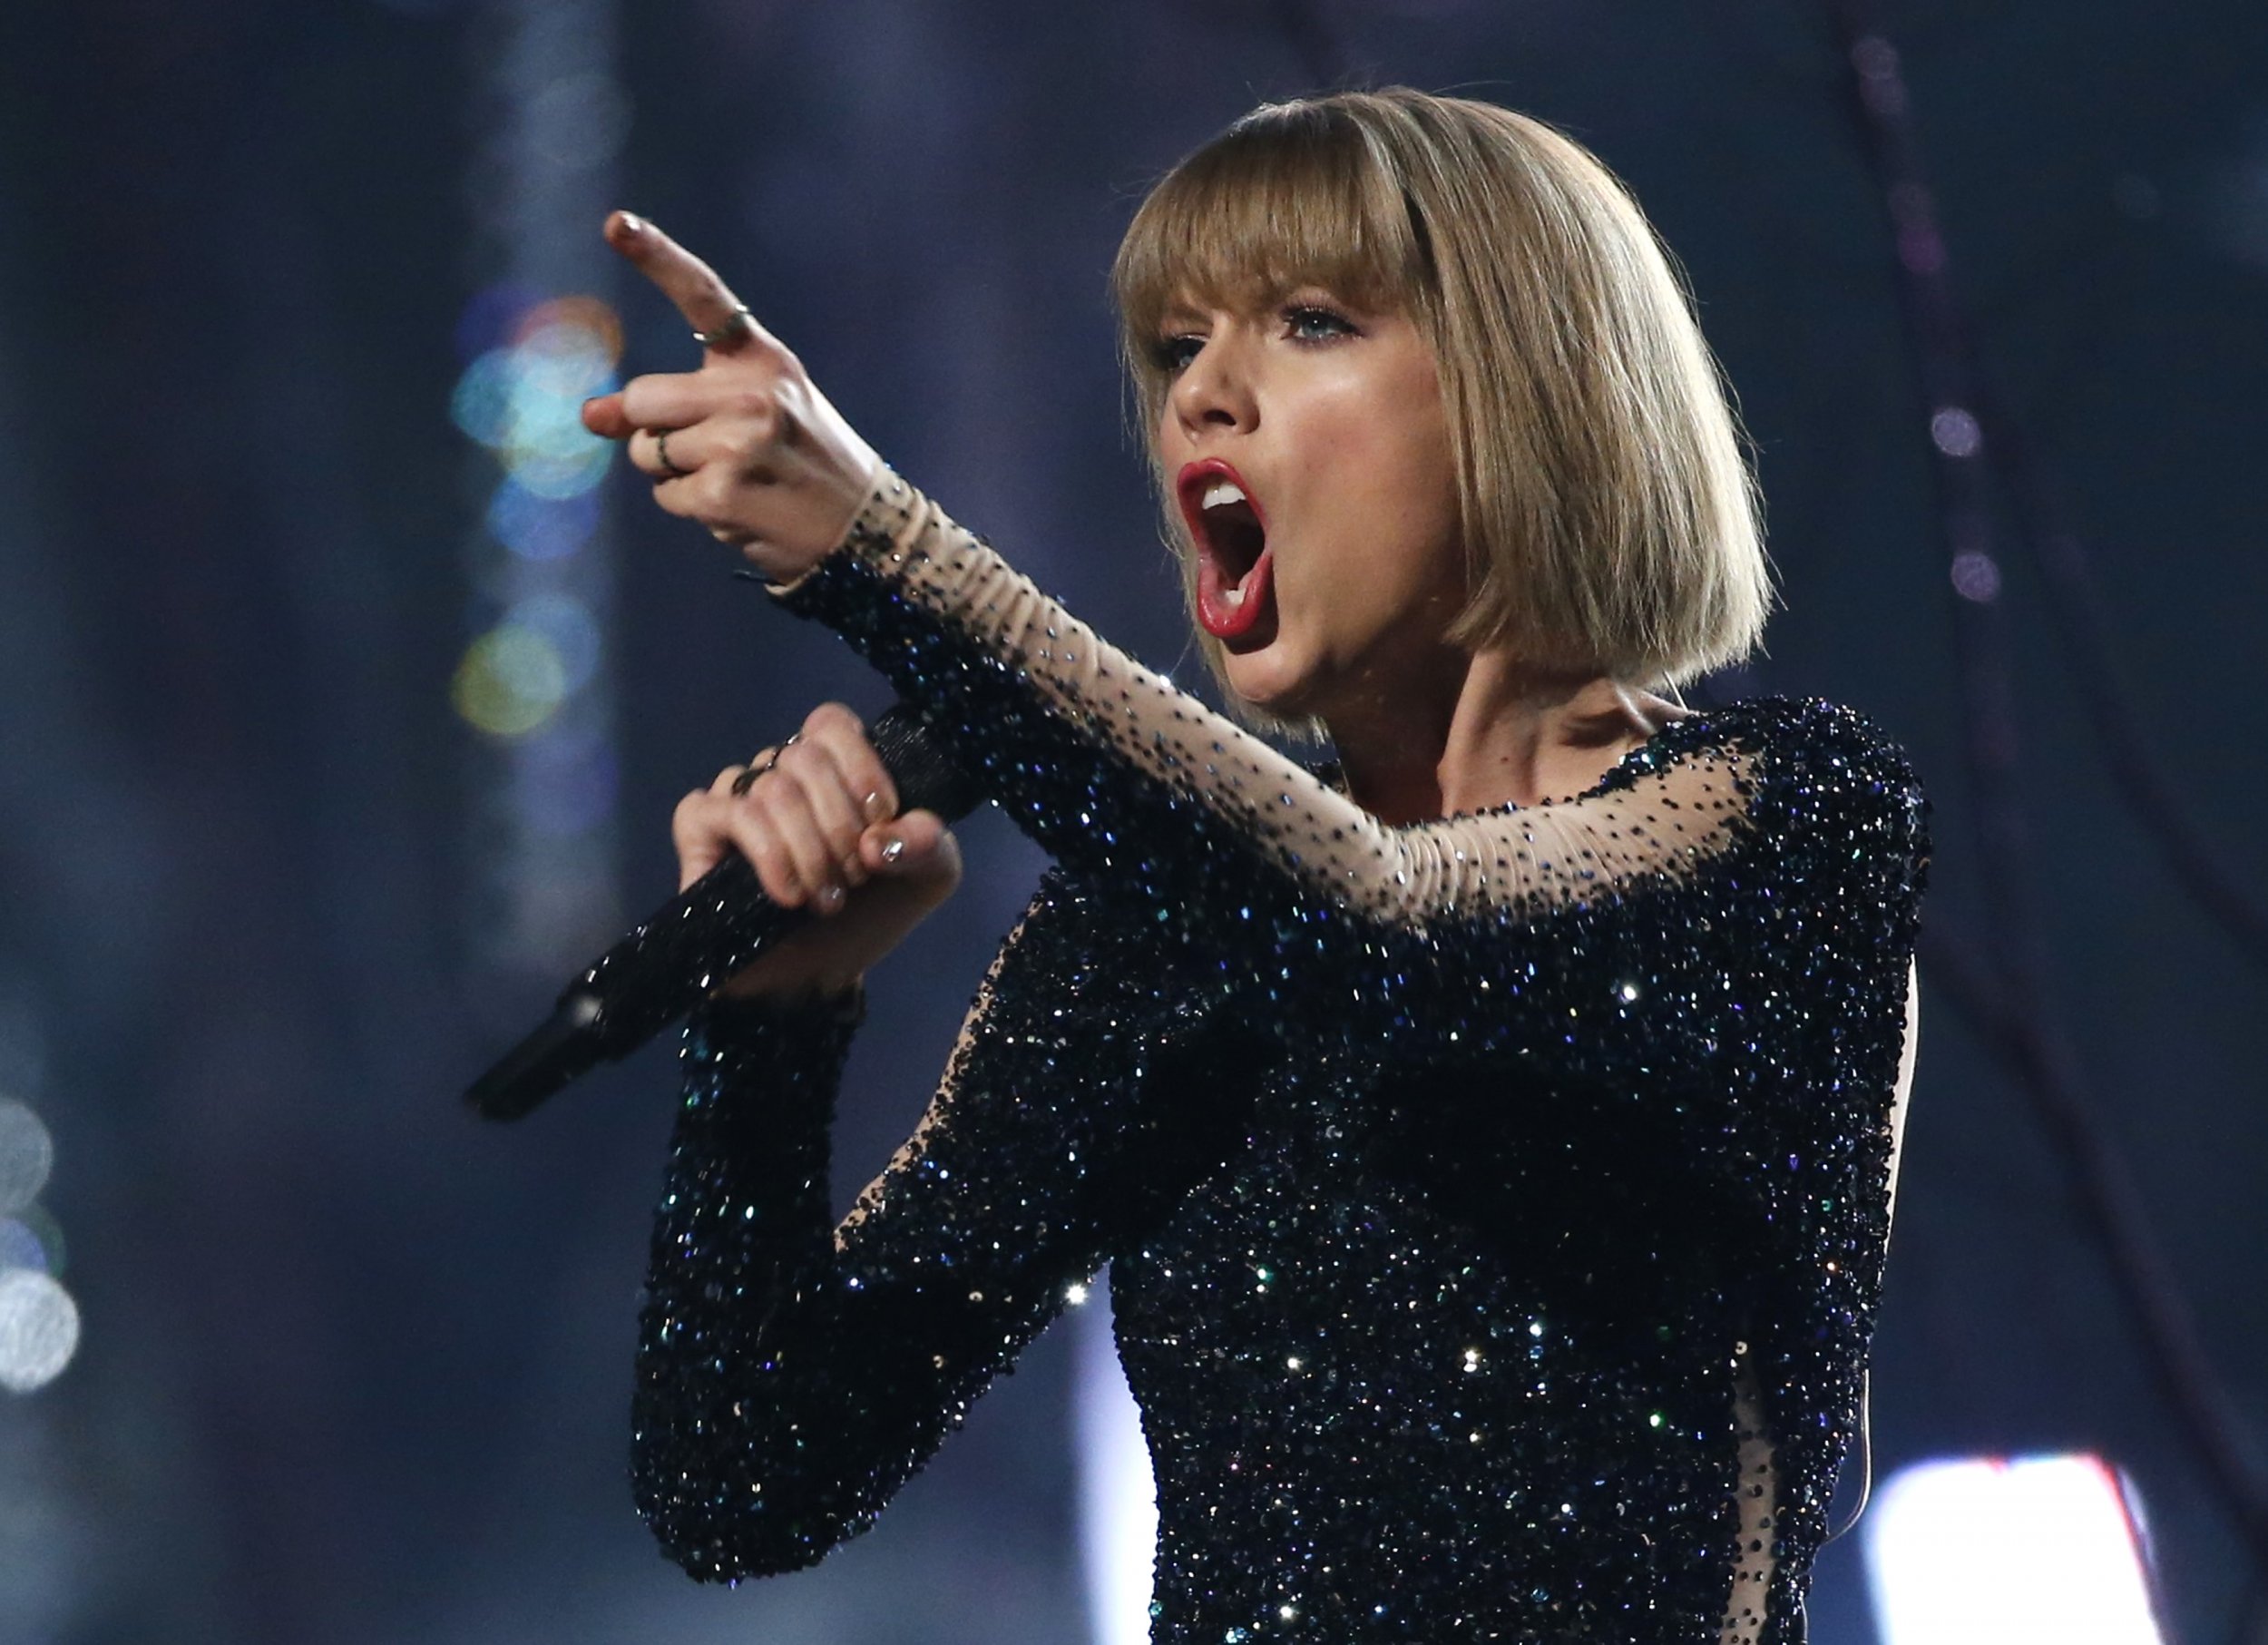 Taylor Swift Drops Clues About Relationship with Joe Alwyn During Eras Tour